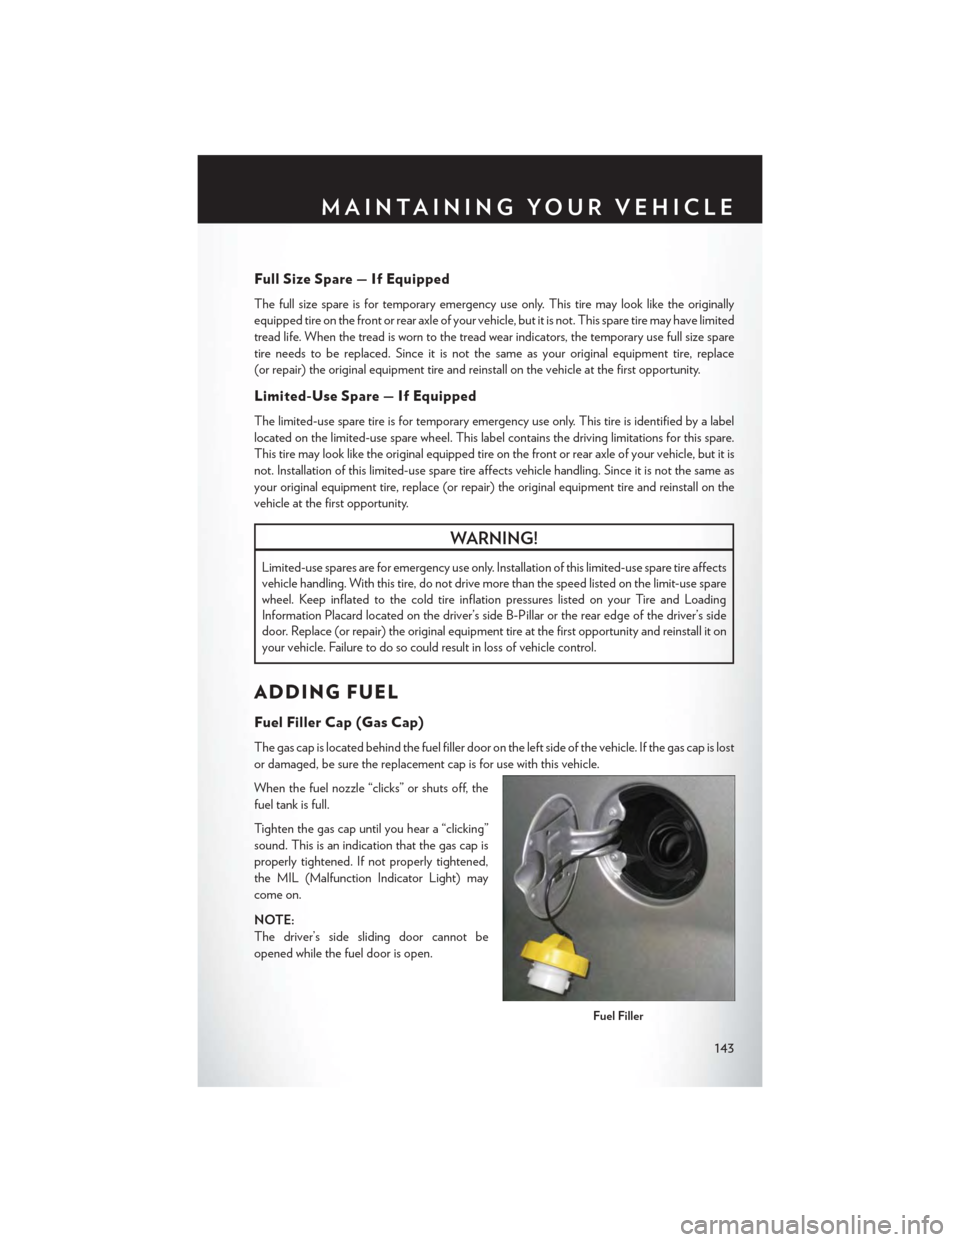 CHRYSLER TOWN AND COUNTRY 2015 5.G User Guide Full Size Spare — If Equipped
The full size spare is for temporary emergency use only. This tire may look like the originally
equipped tire on the front or rear axle of your vehicle, but it is not. 